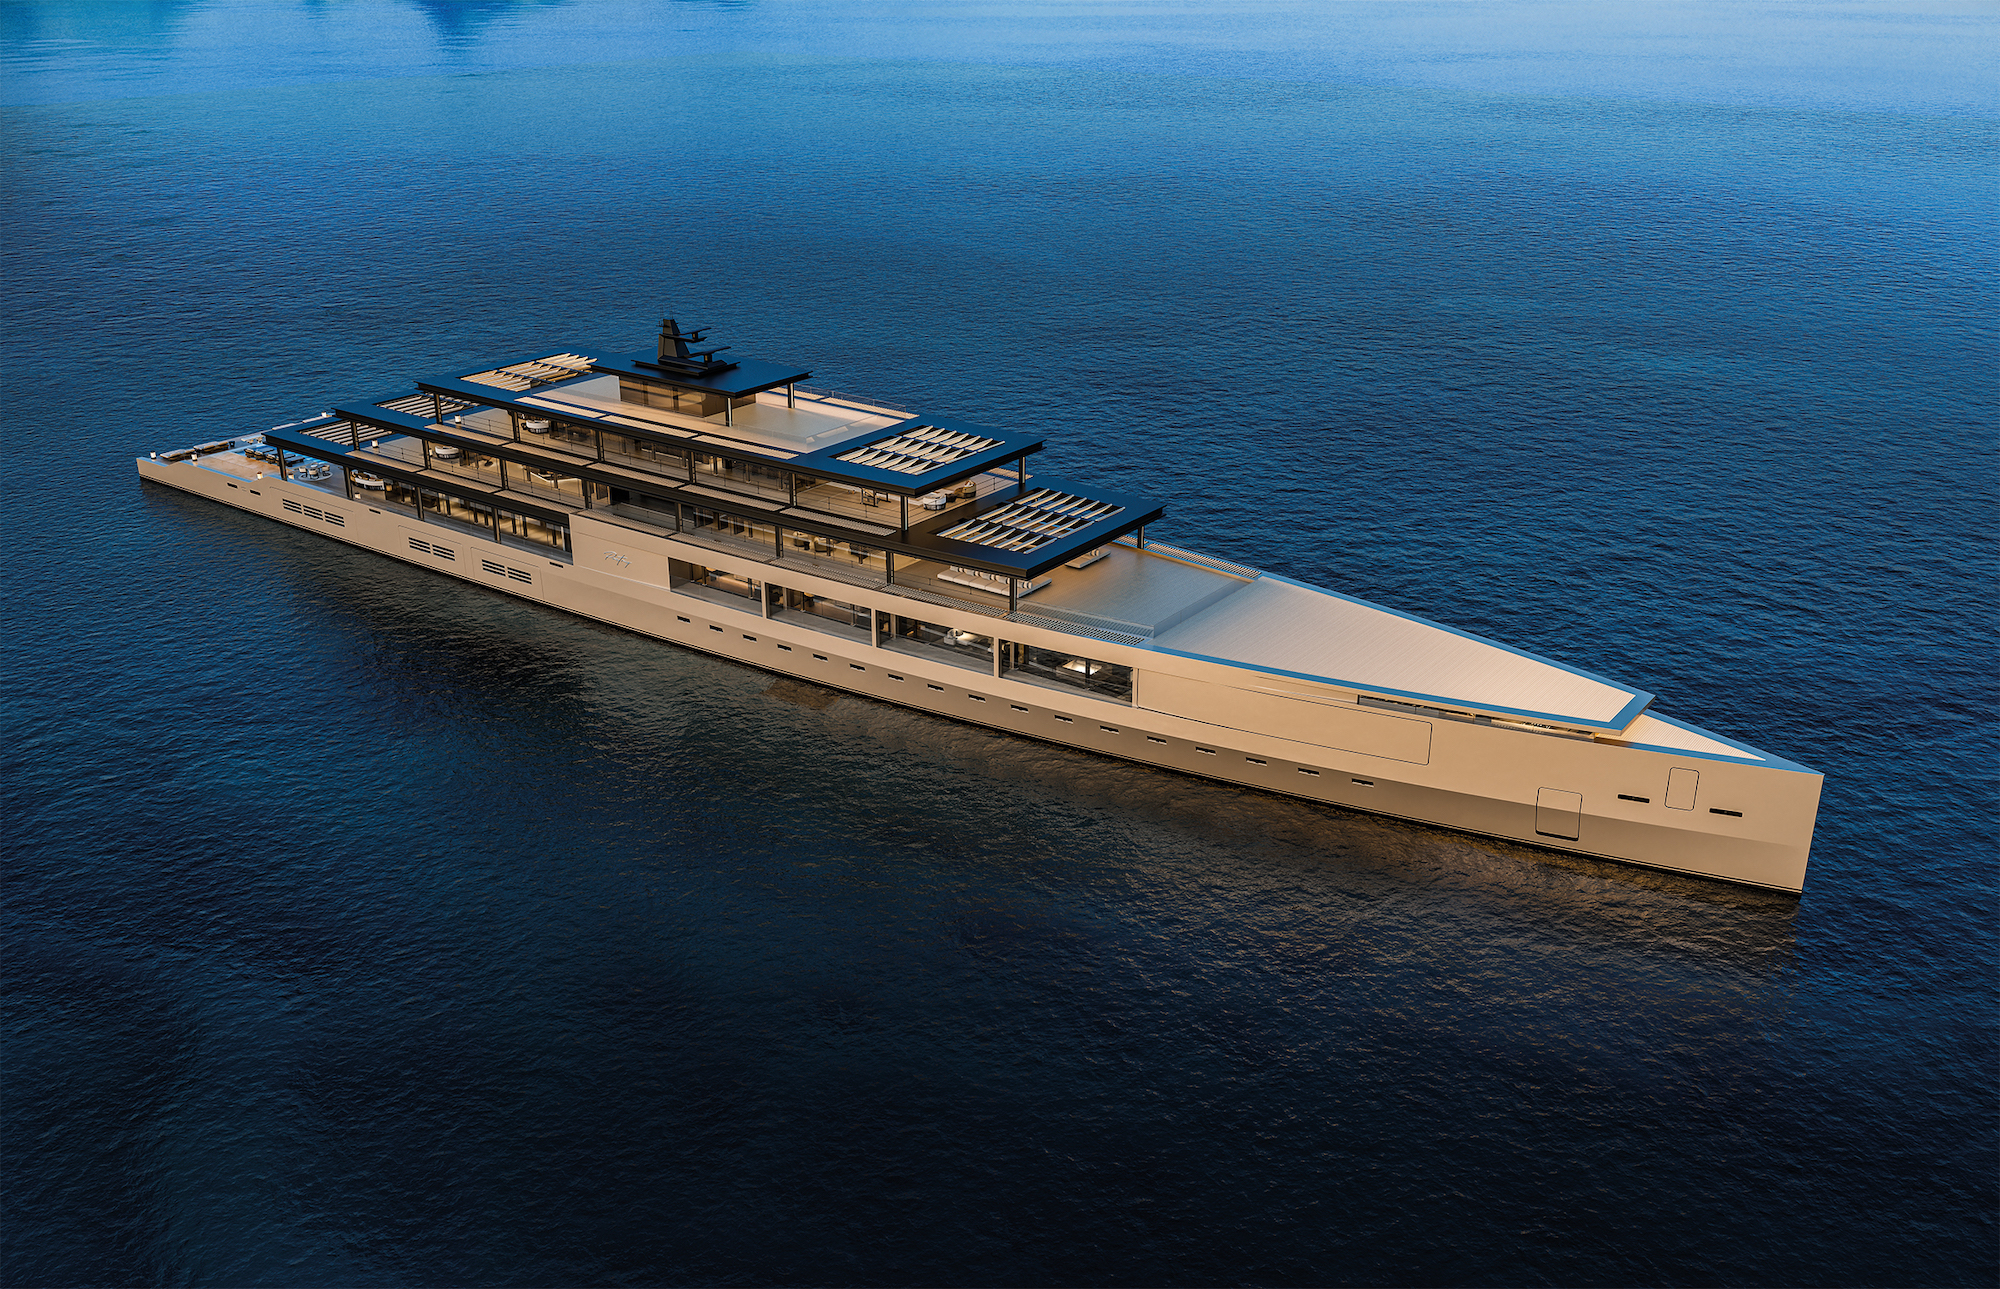 The striking exterior of the superyacht concept Poetry by Dutch studio Sinot Yacht Architecture & Design - Effect Magazine